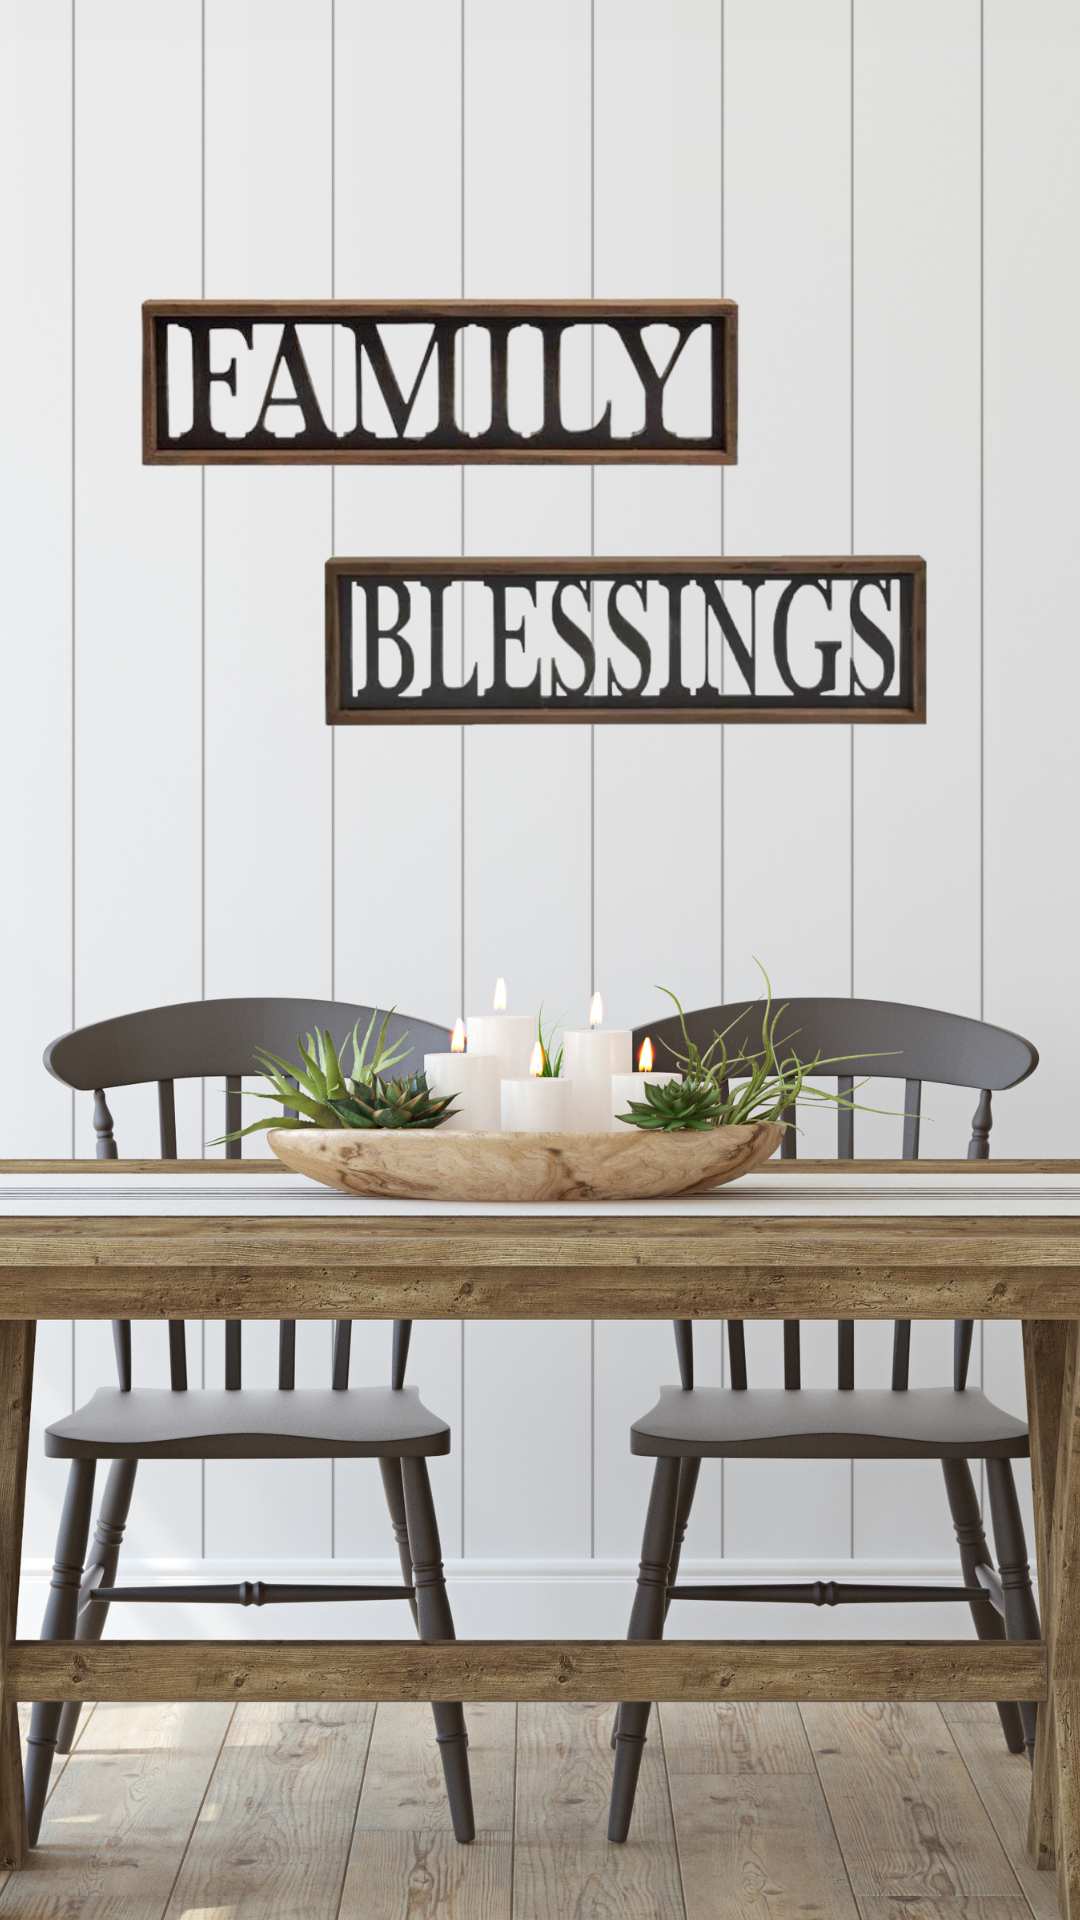 Blessings Framed Sign by CWI